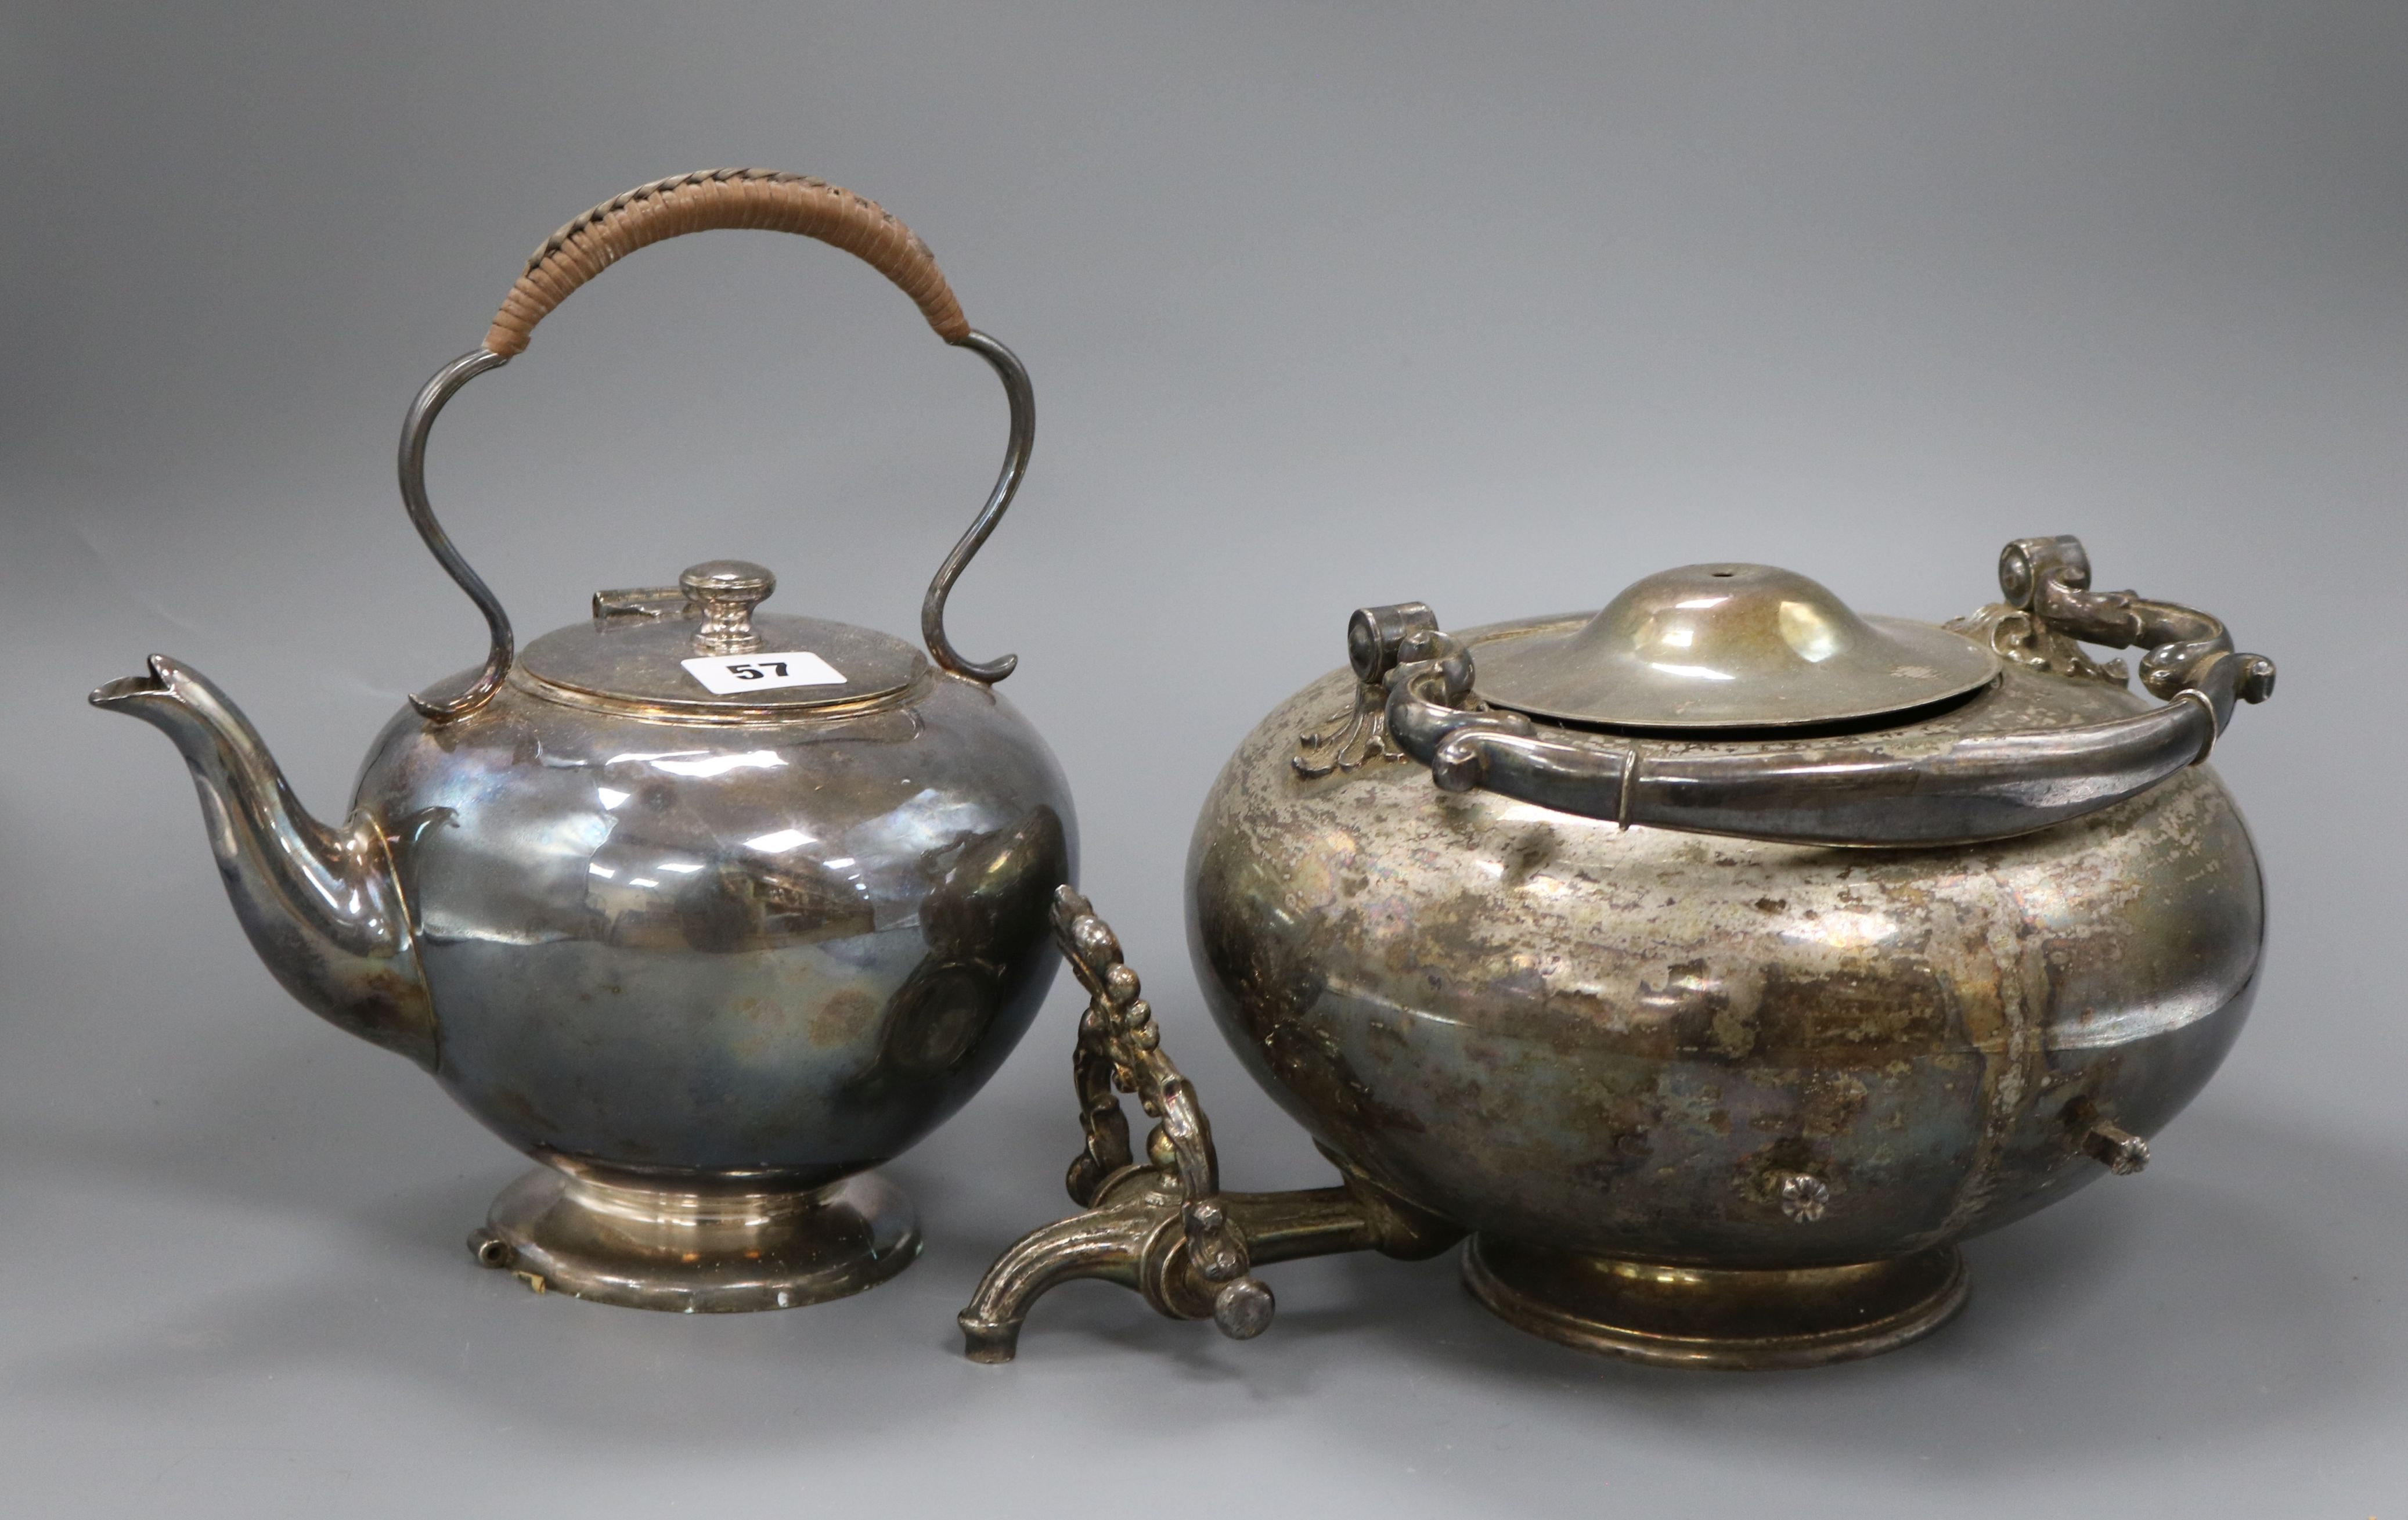 Two electroplated tea kettles, c.1880